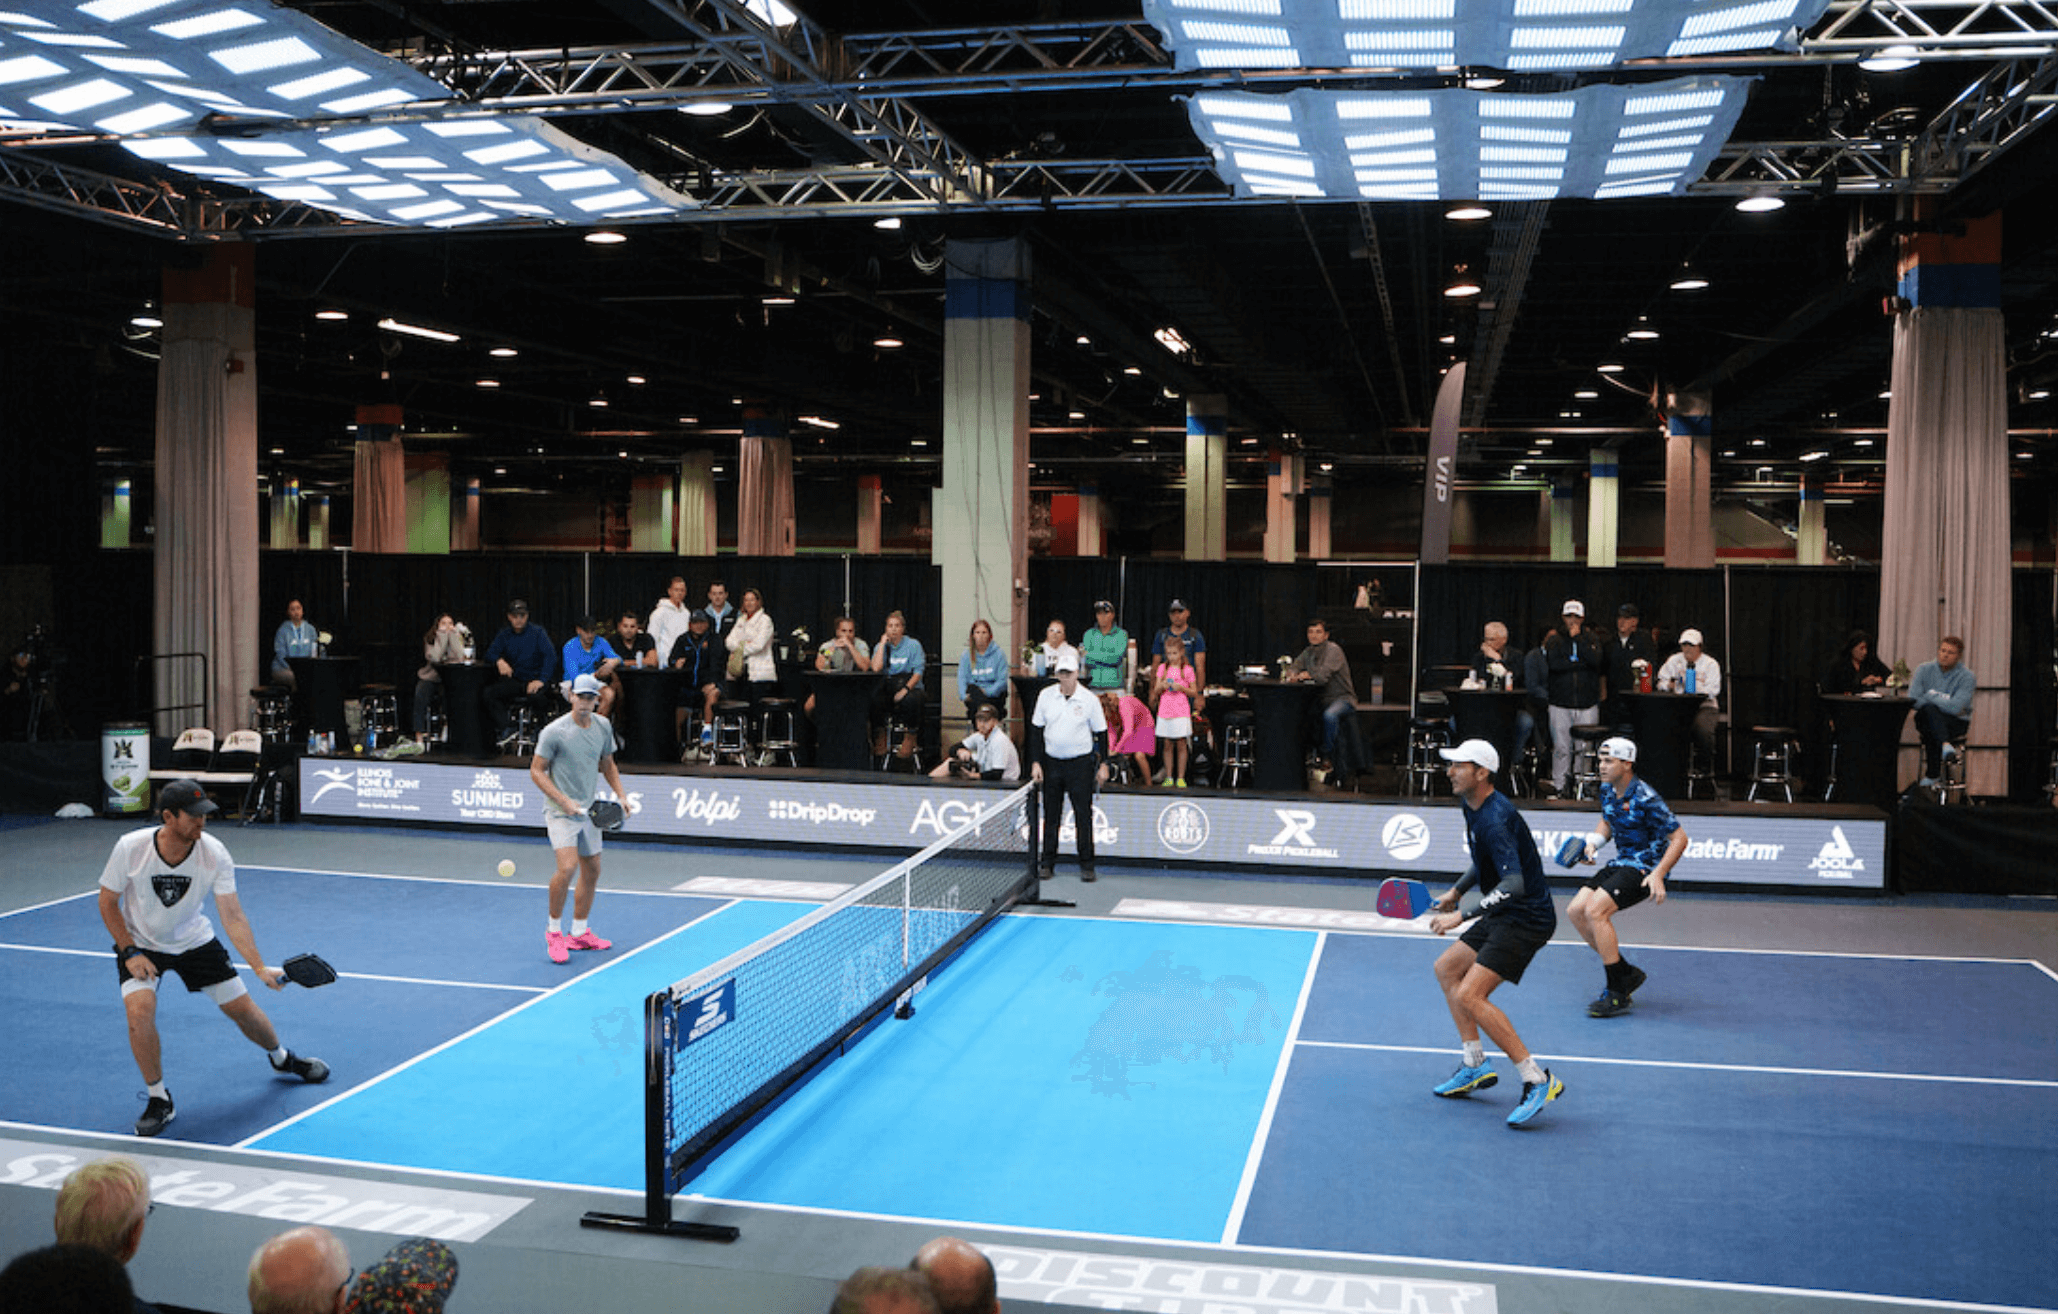 Big news as pickleball professionals get new team competition